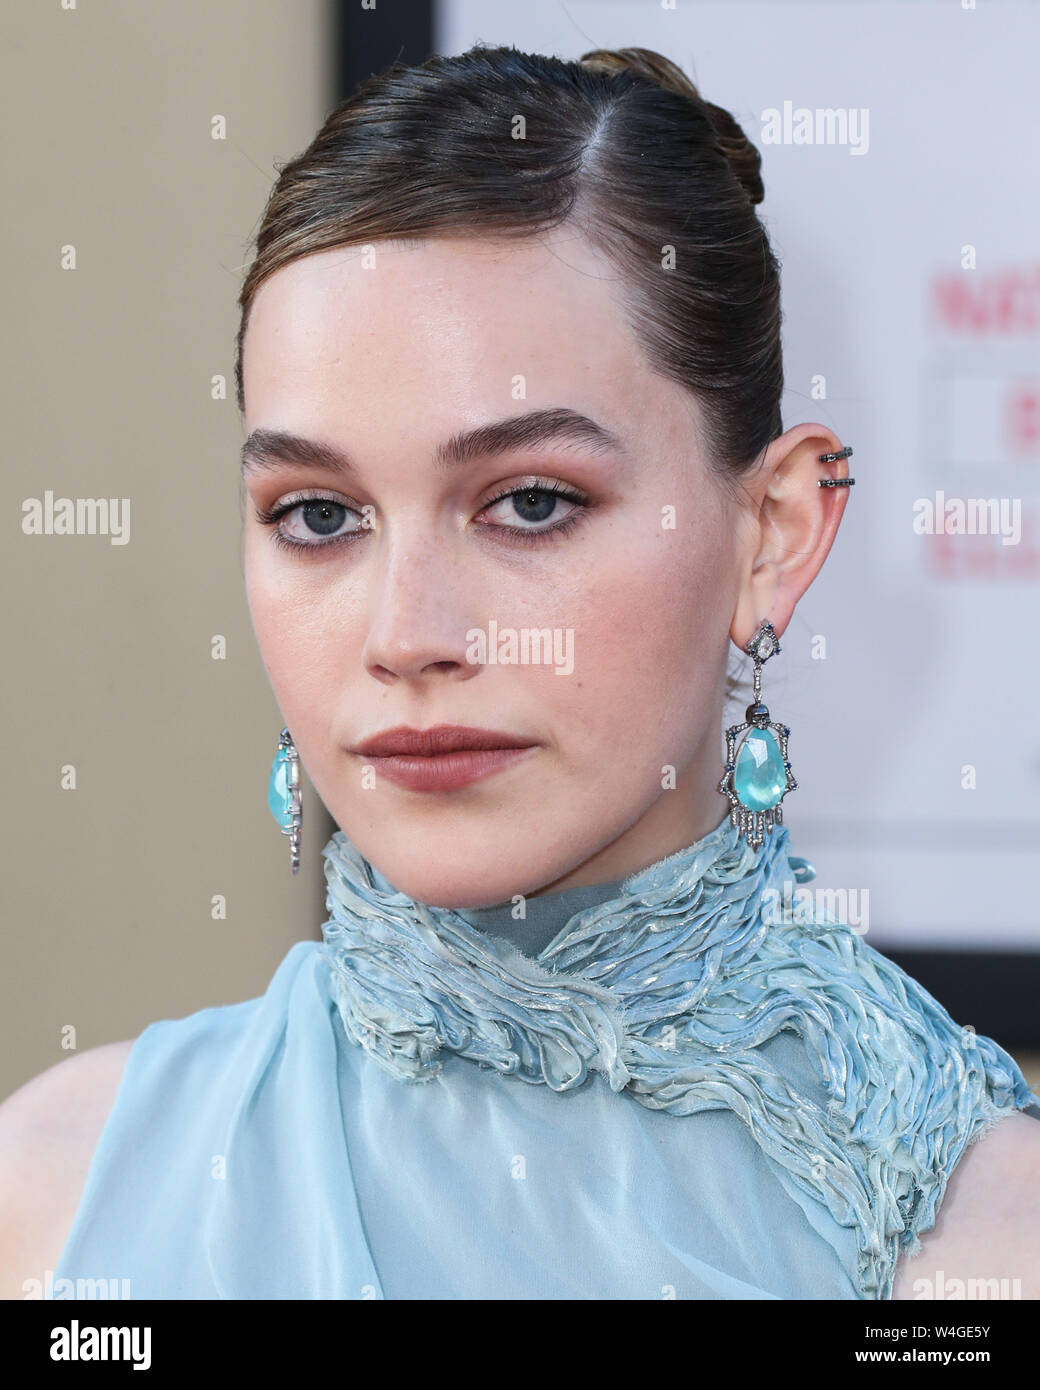 HOLLYWOOD, LOS ANGELES, Kalifornien, USA - 22. Juli: Victoria Pedretti kommt an der Uraufführung von Sony Pictures'' Once Upon a Time in Hollywood' an der TCL Chinese Theater IMAX am 22 Juli, 2019 in Hollywood, Los Angeles, Kalifornien, USA. (Foto von Xavier Collin/Image Press Agency) Stockfoto